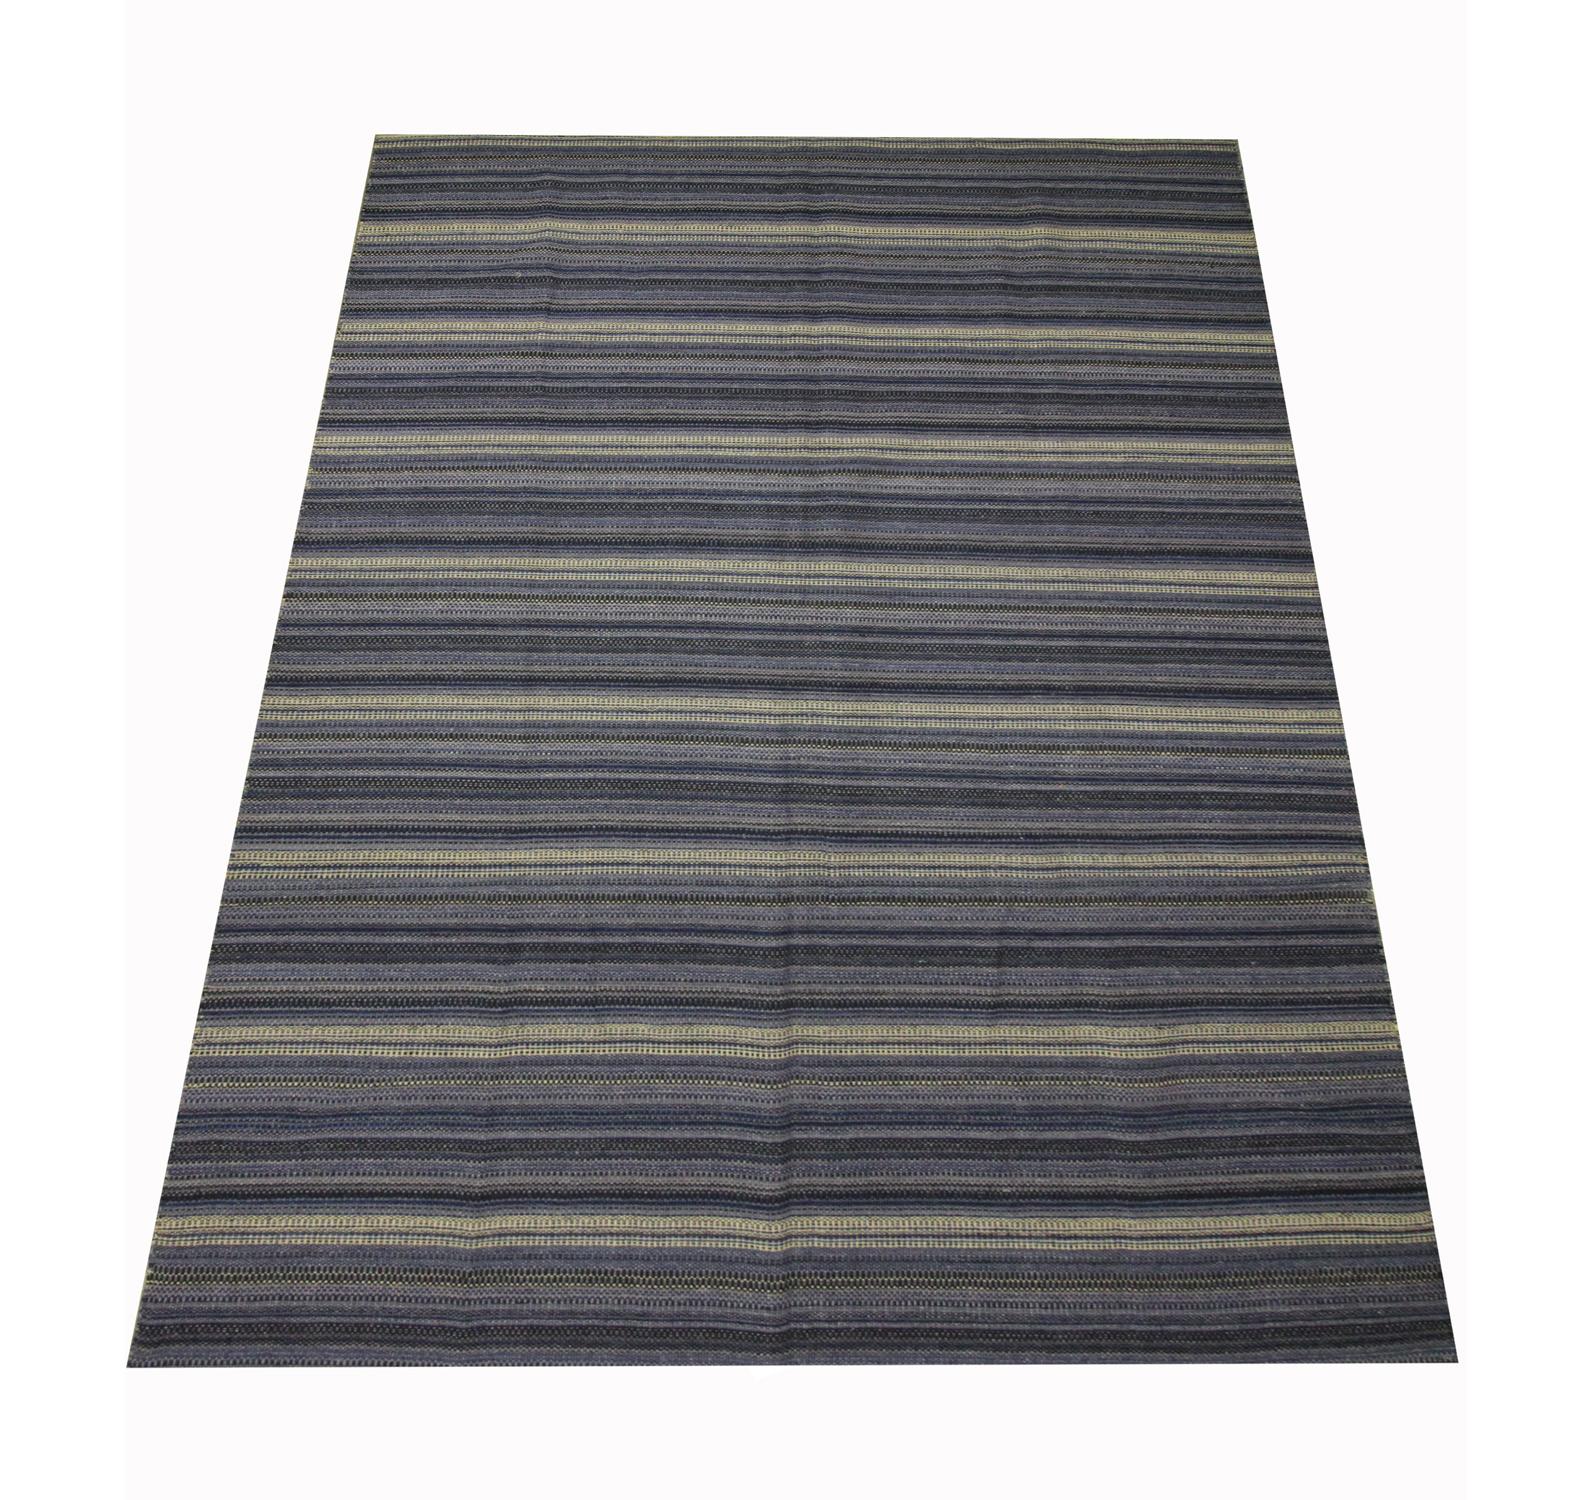 This bold striped carpet area rug is a flat woven kilim, woven by hand in the early 21st century. The design features an abstract colourful pattern woven in accents of yellow, grey and black. The colour and the design make this piece the perfect